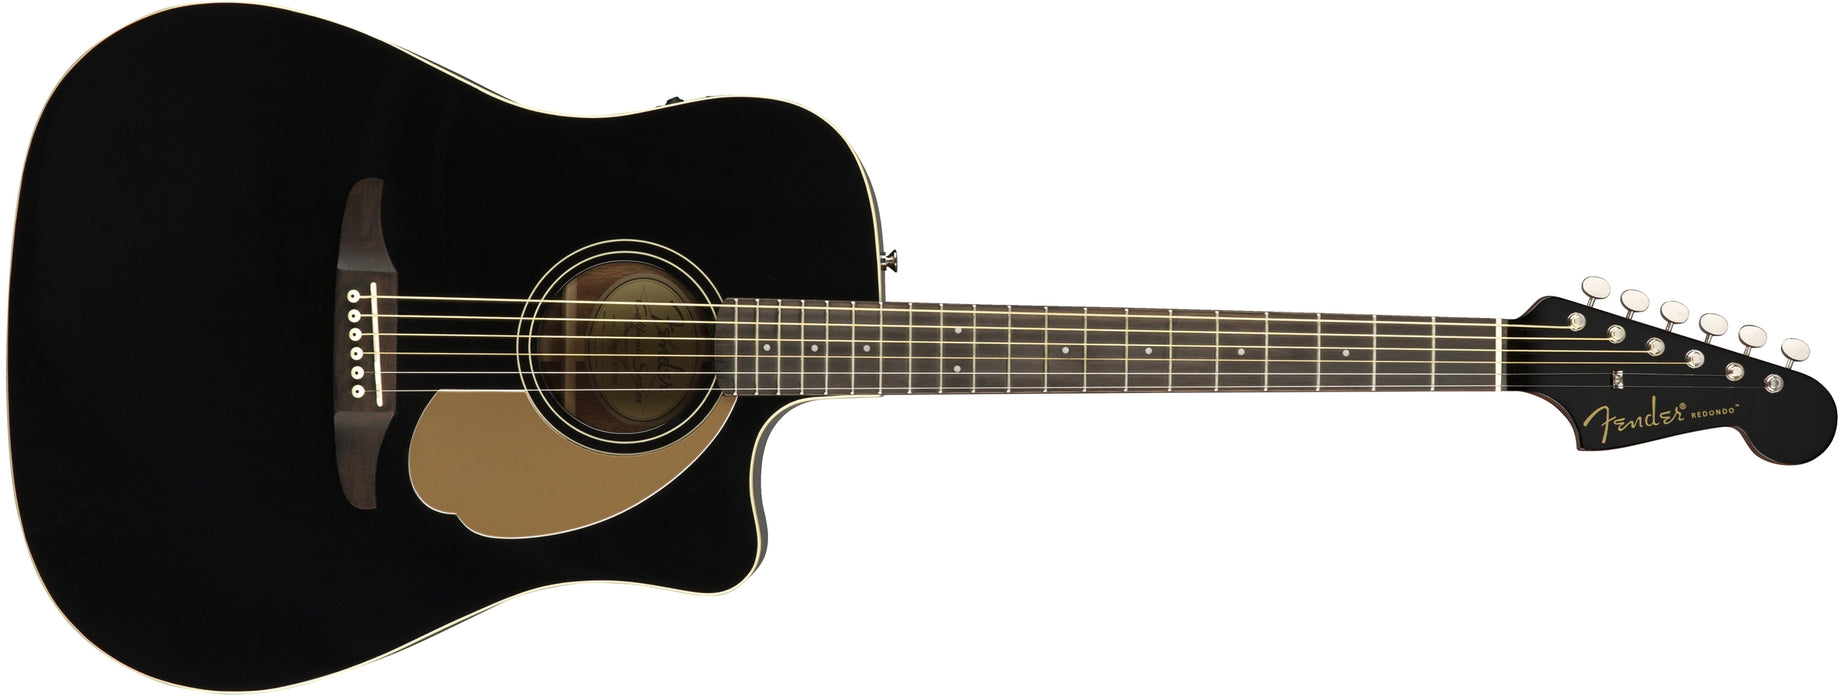 Fender Redondo Player Acoustic Electric Guitar - Jetty Black